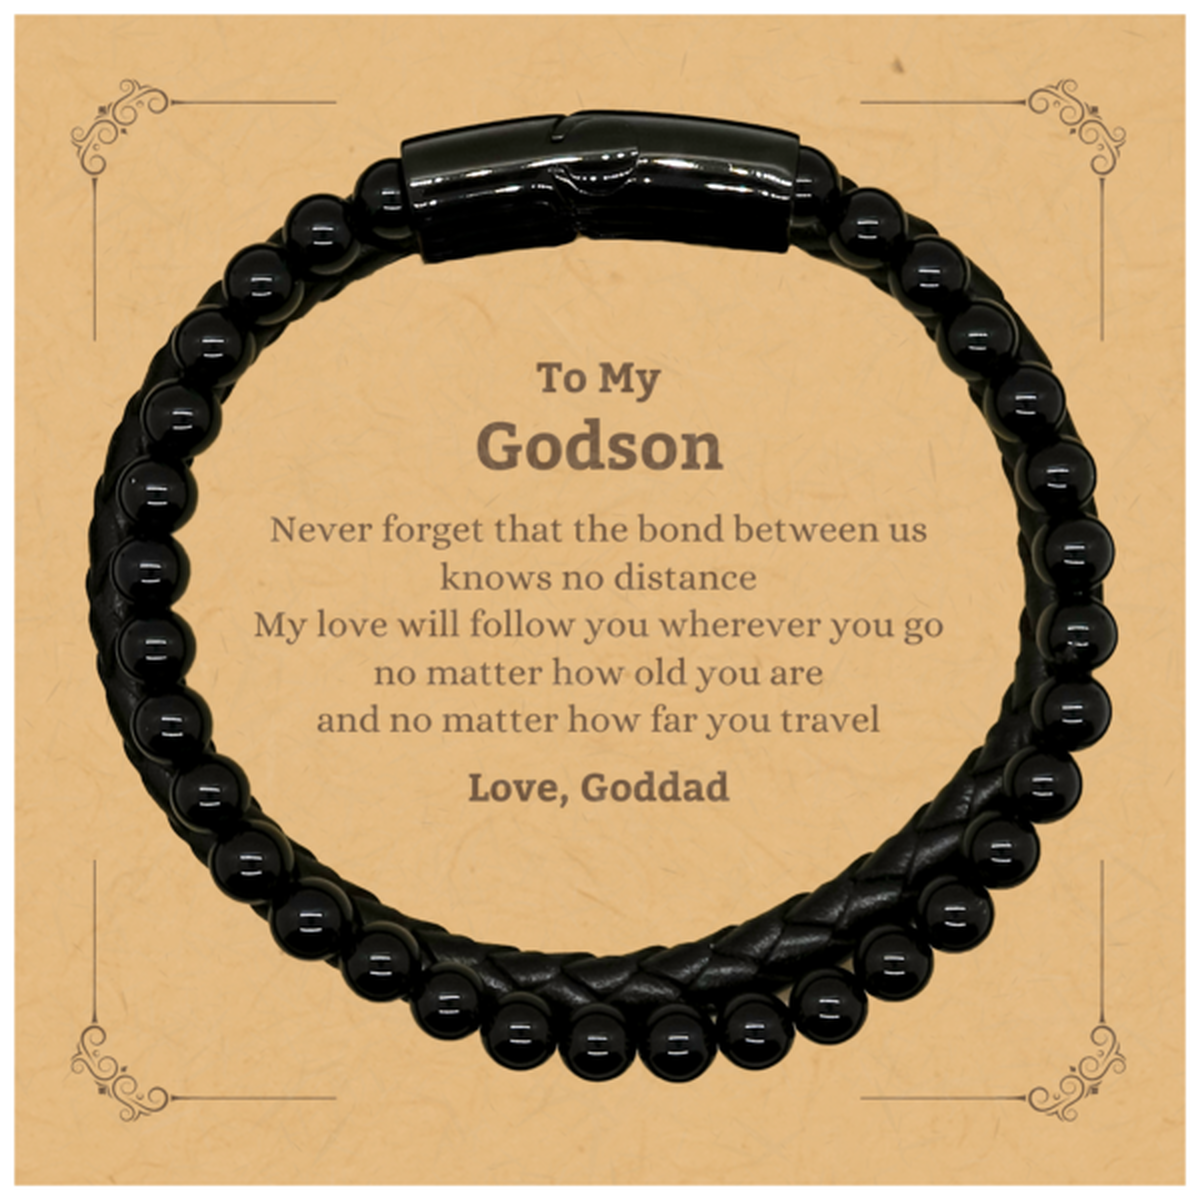 Godson Birthday Gifts from Goddad, Adjustable Stone Leather Bracelets for Godson Christmas Graduation Unique Gifts Godson Never forget that the bond between us knows no distance. Love, Goddad